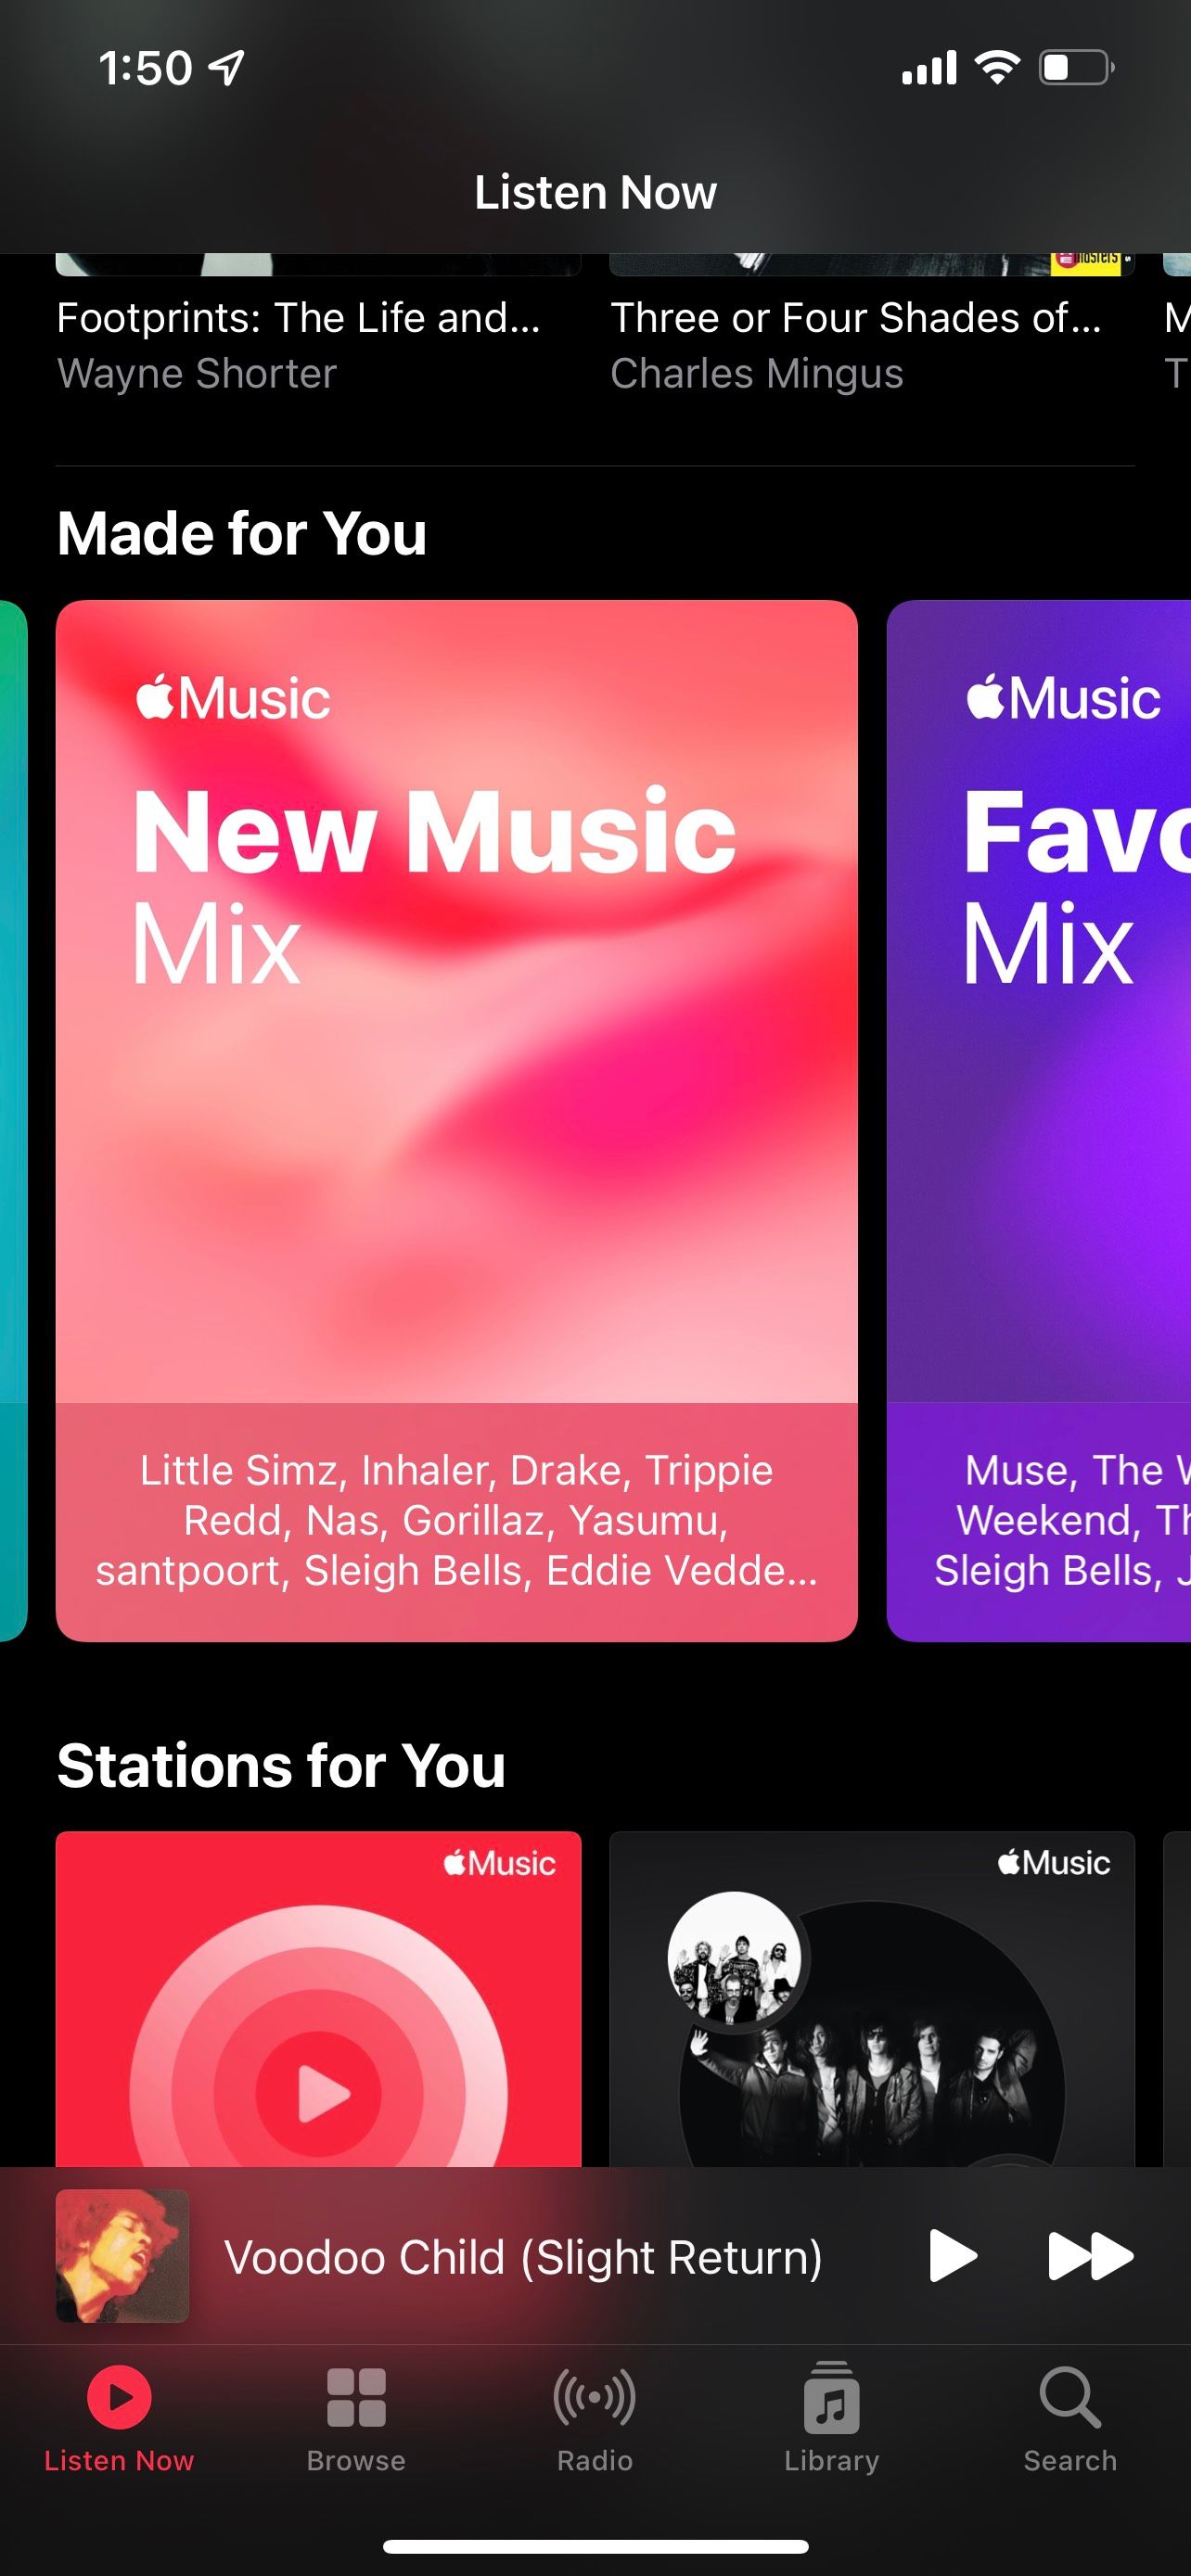 music made for you playlists station